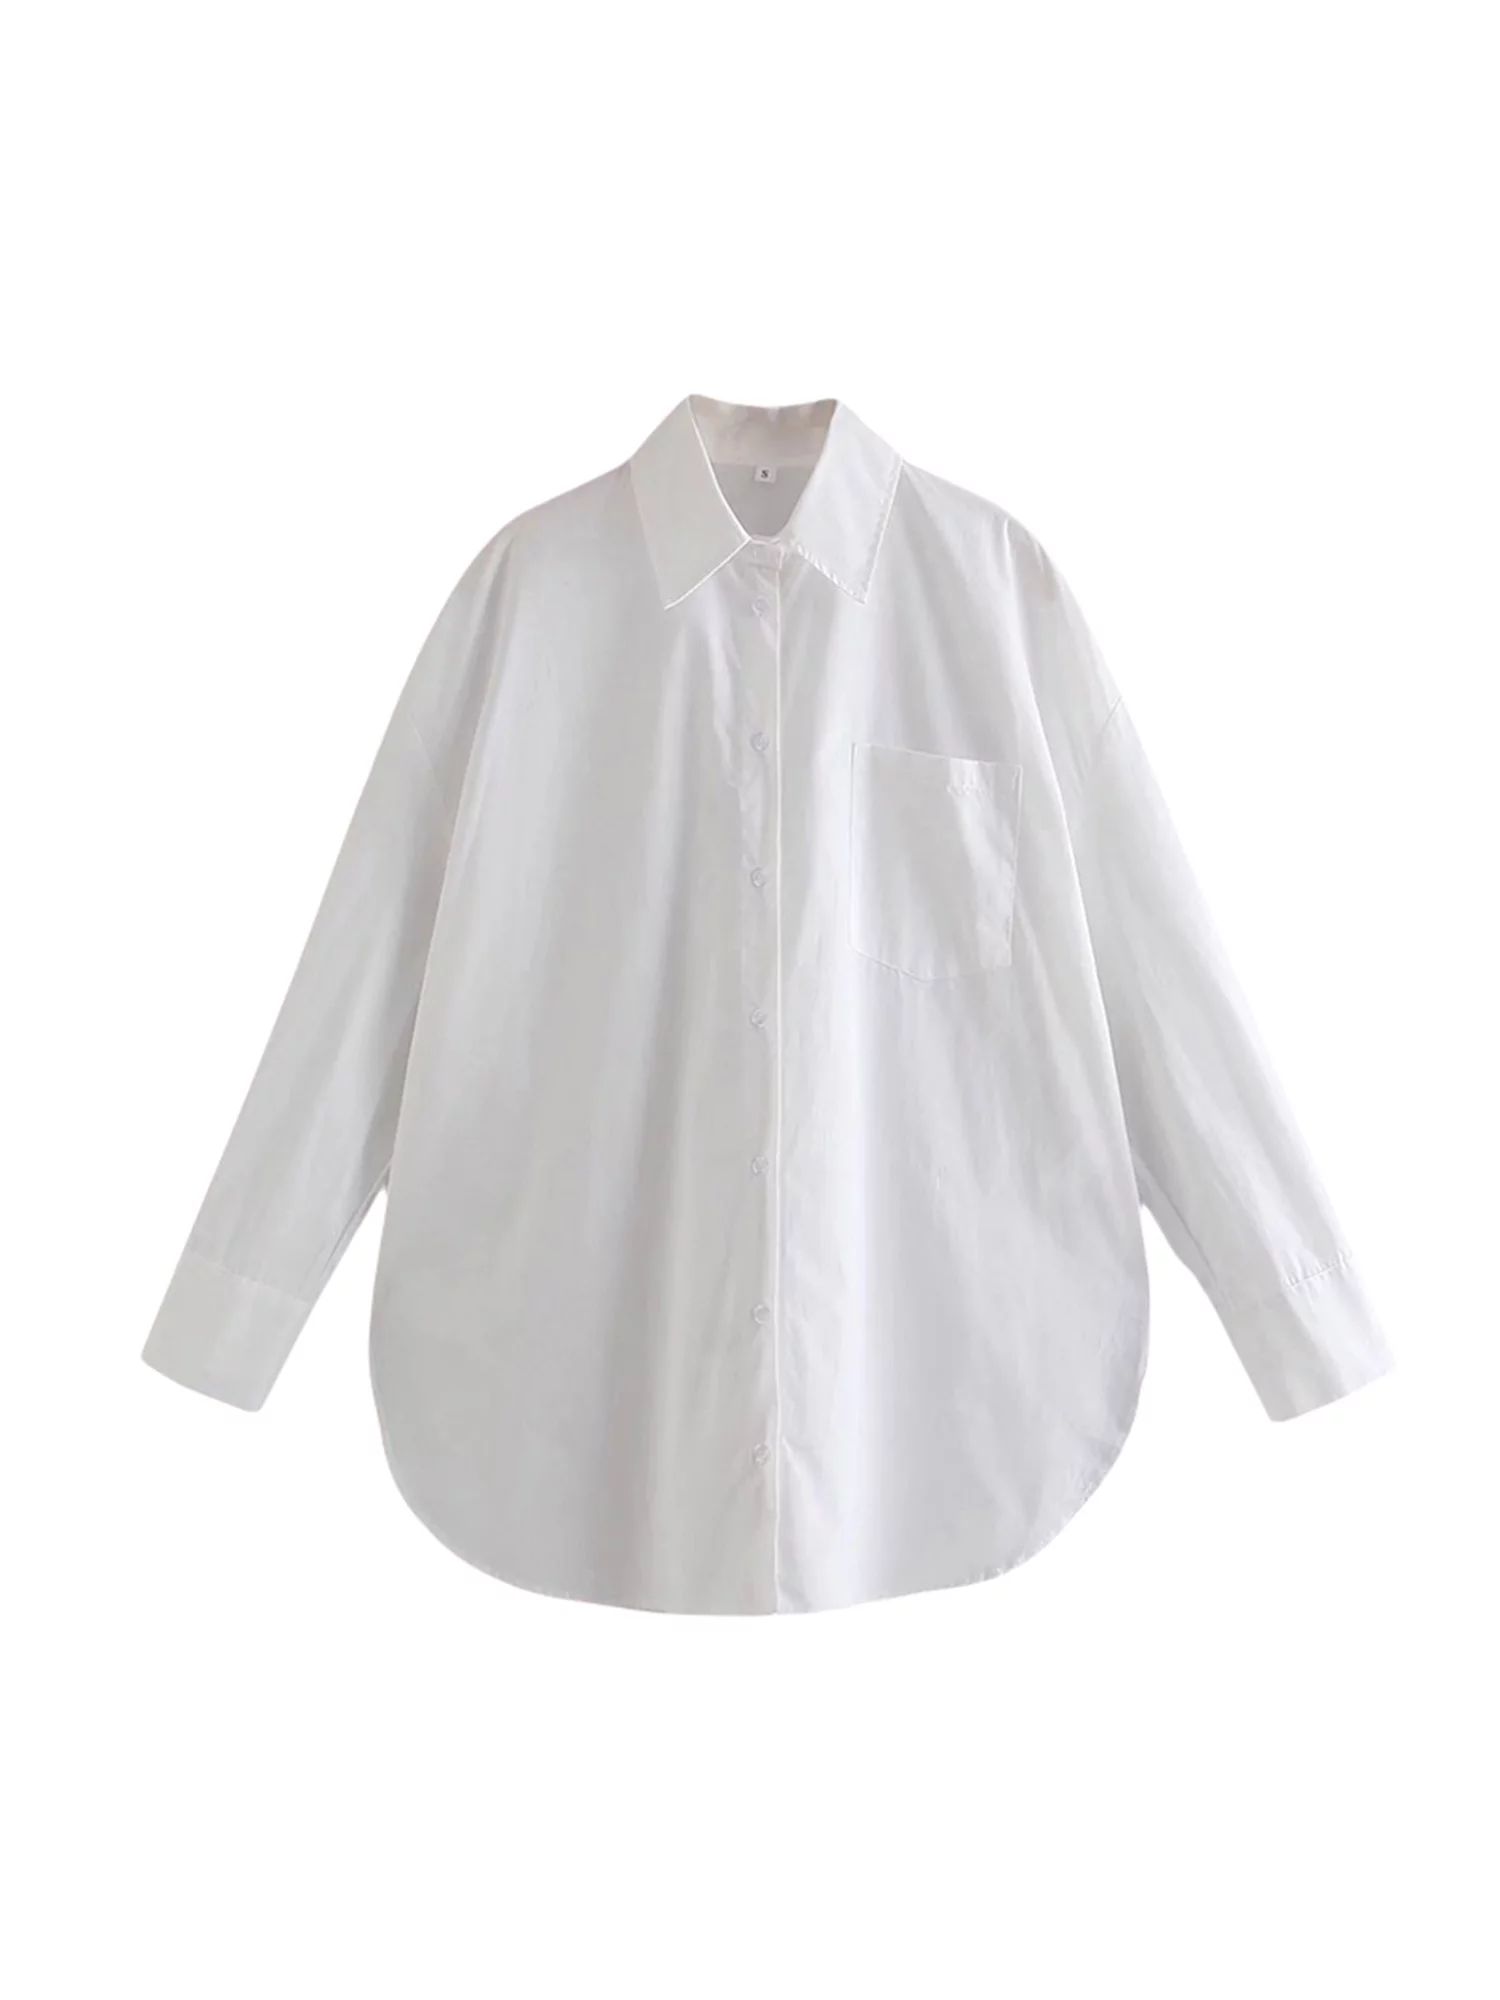 Women's Button-Down Oversized Long Sleeve Shirt, Candy Color Turn-Down Collar Casual Blouse Tops | Walmart (US)